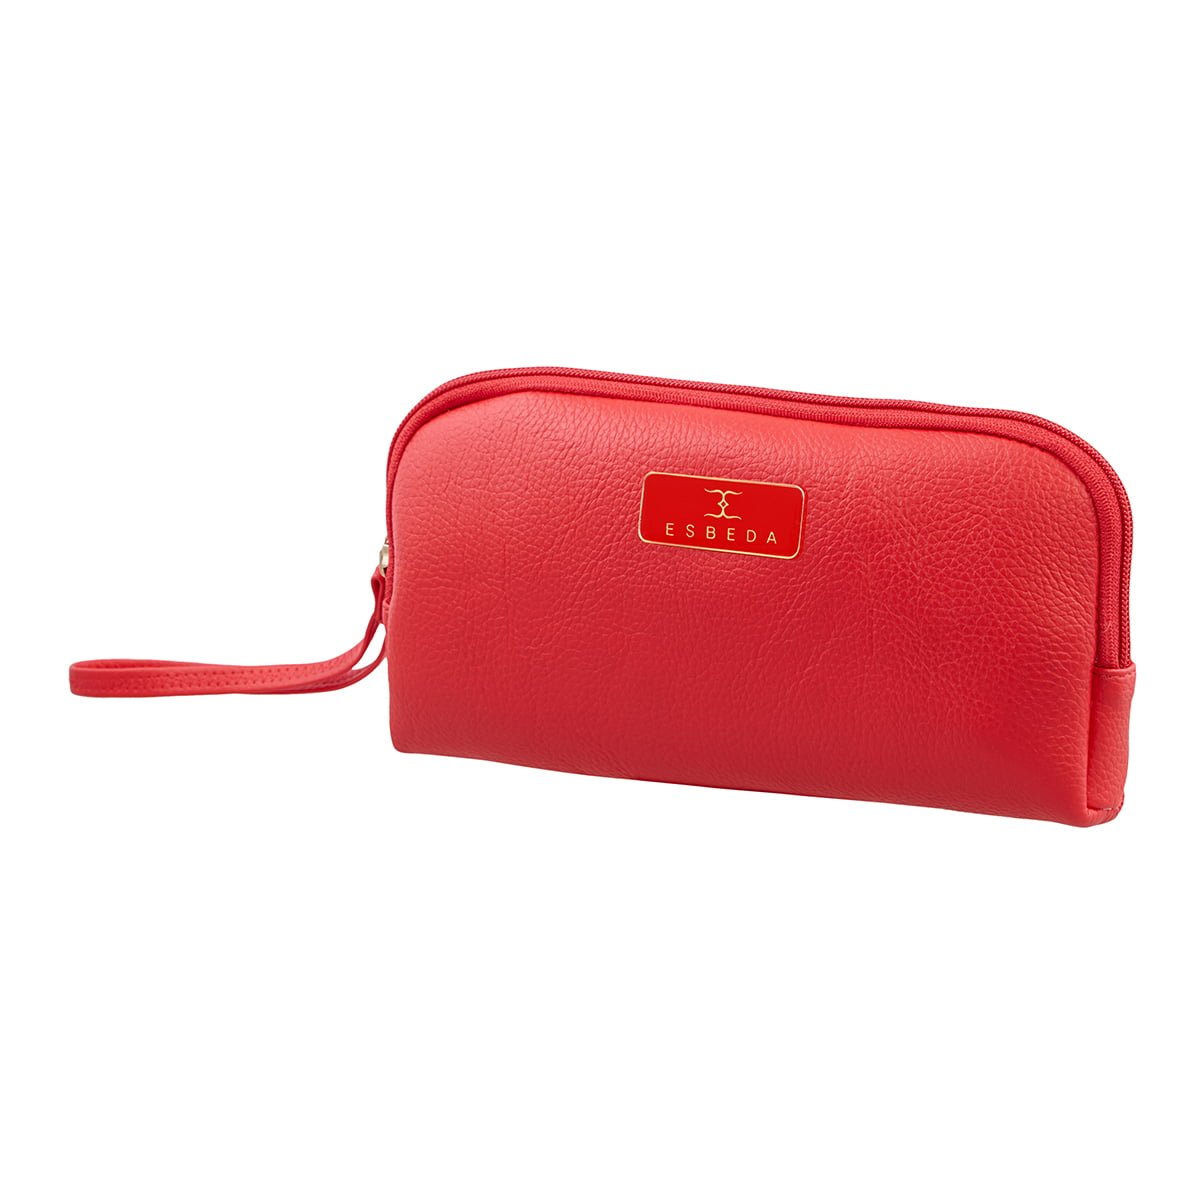 Buy Esbeda Small Solid Handheld Bag Multi Online at Low Prices in India -  Paytmmall.com